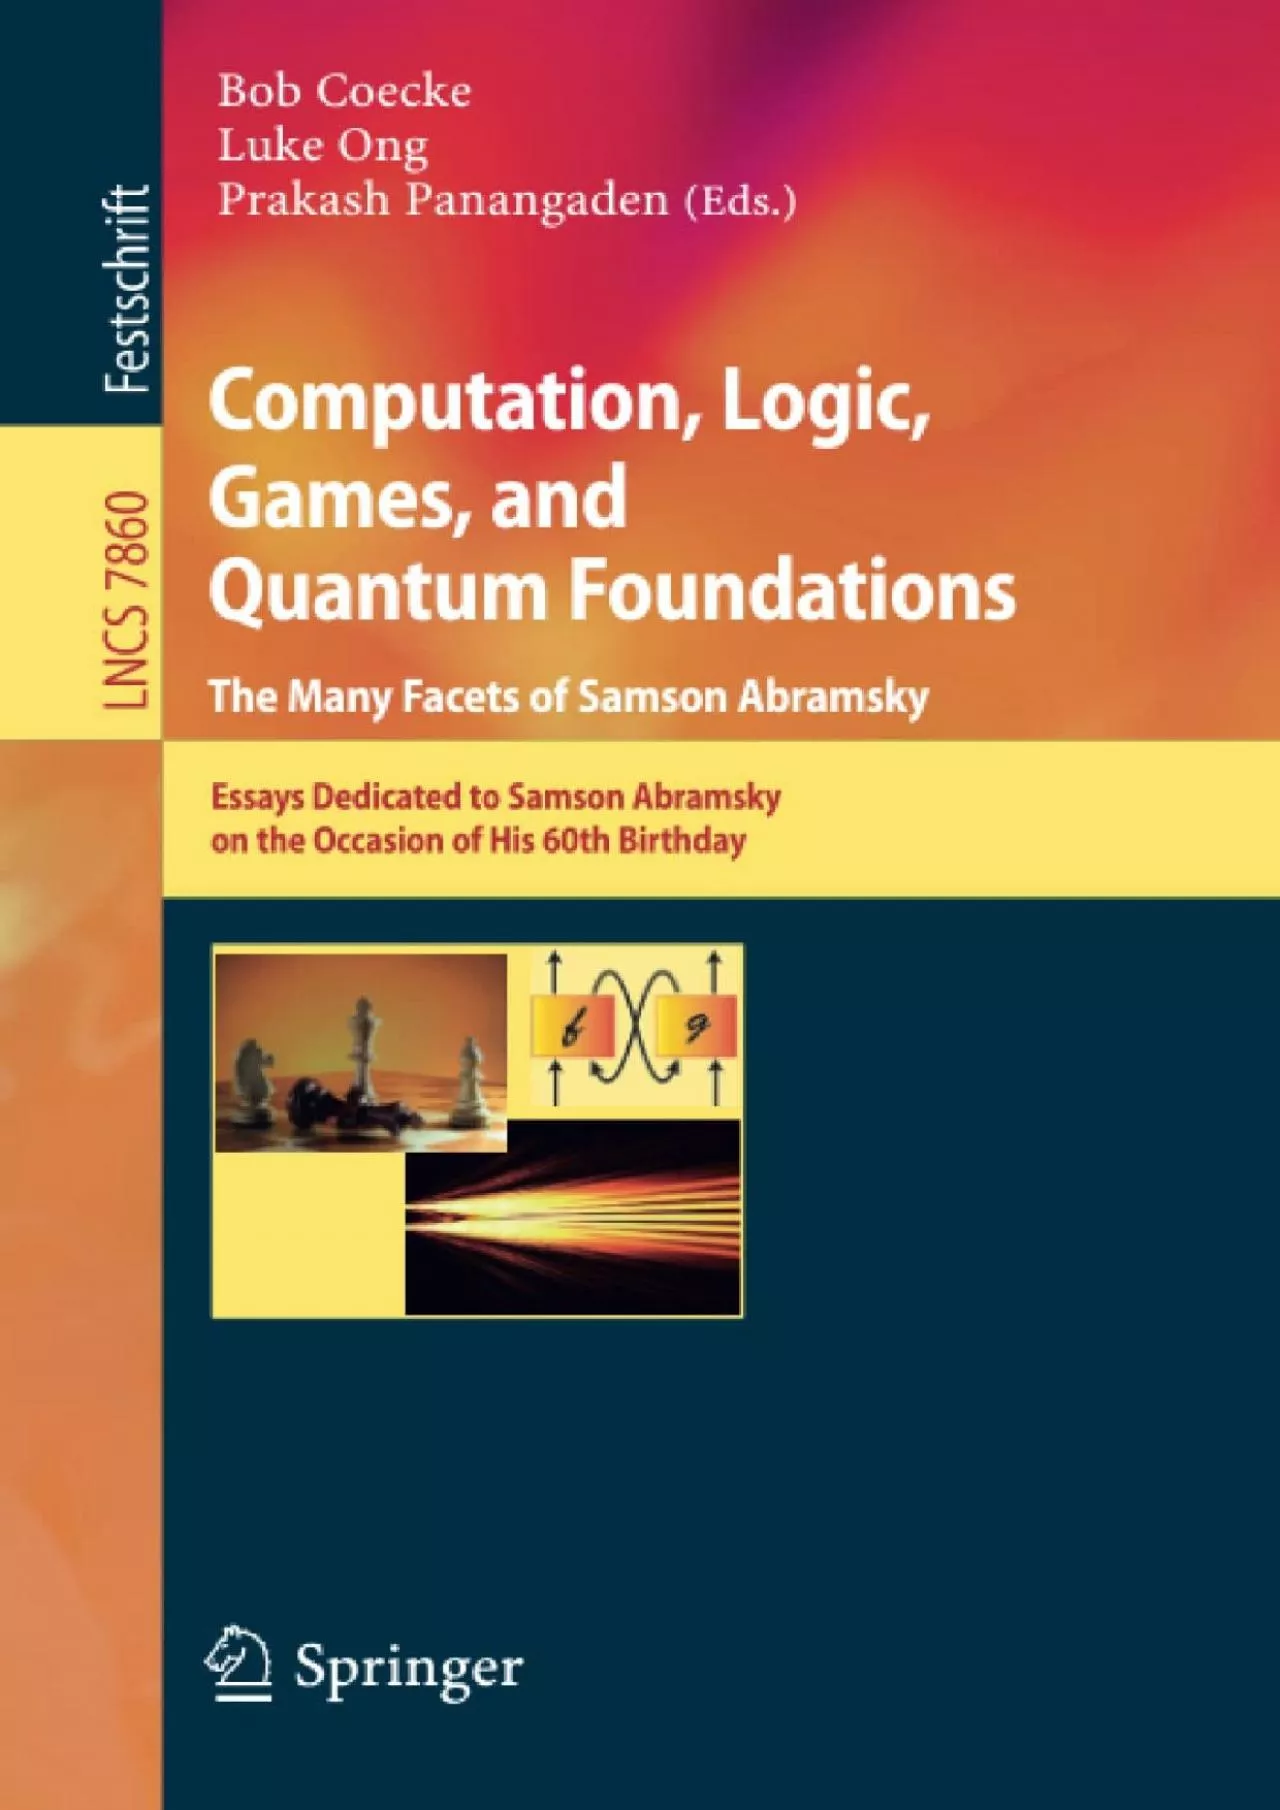 [DOWLOAD]-Computation, Logic, Games, and Quantum Foundations - The Many Facets of Samson